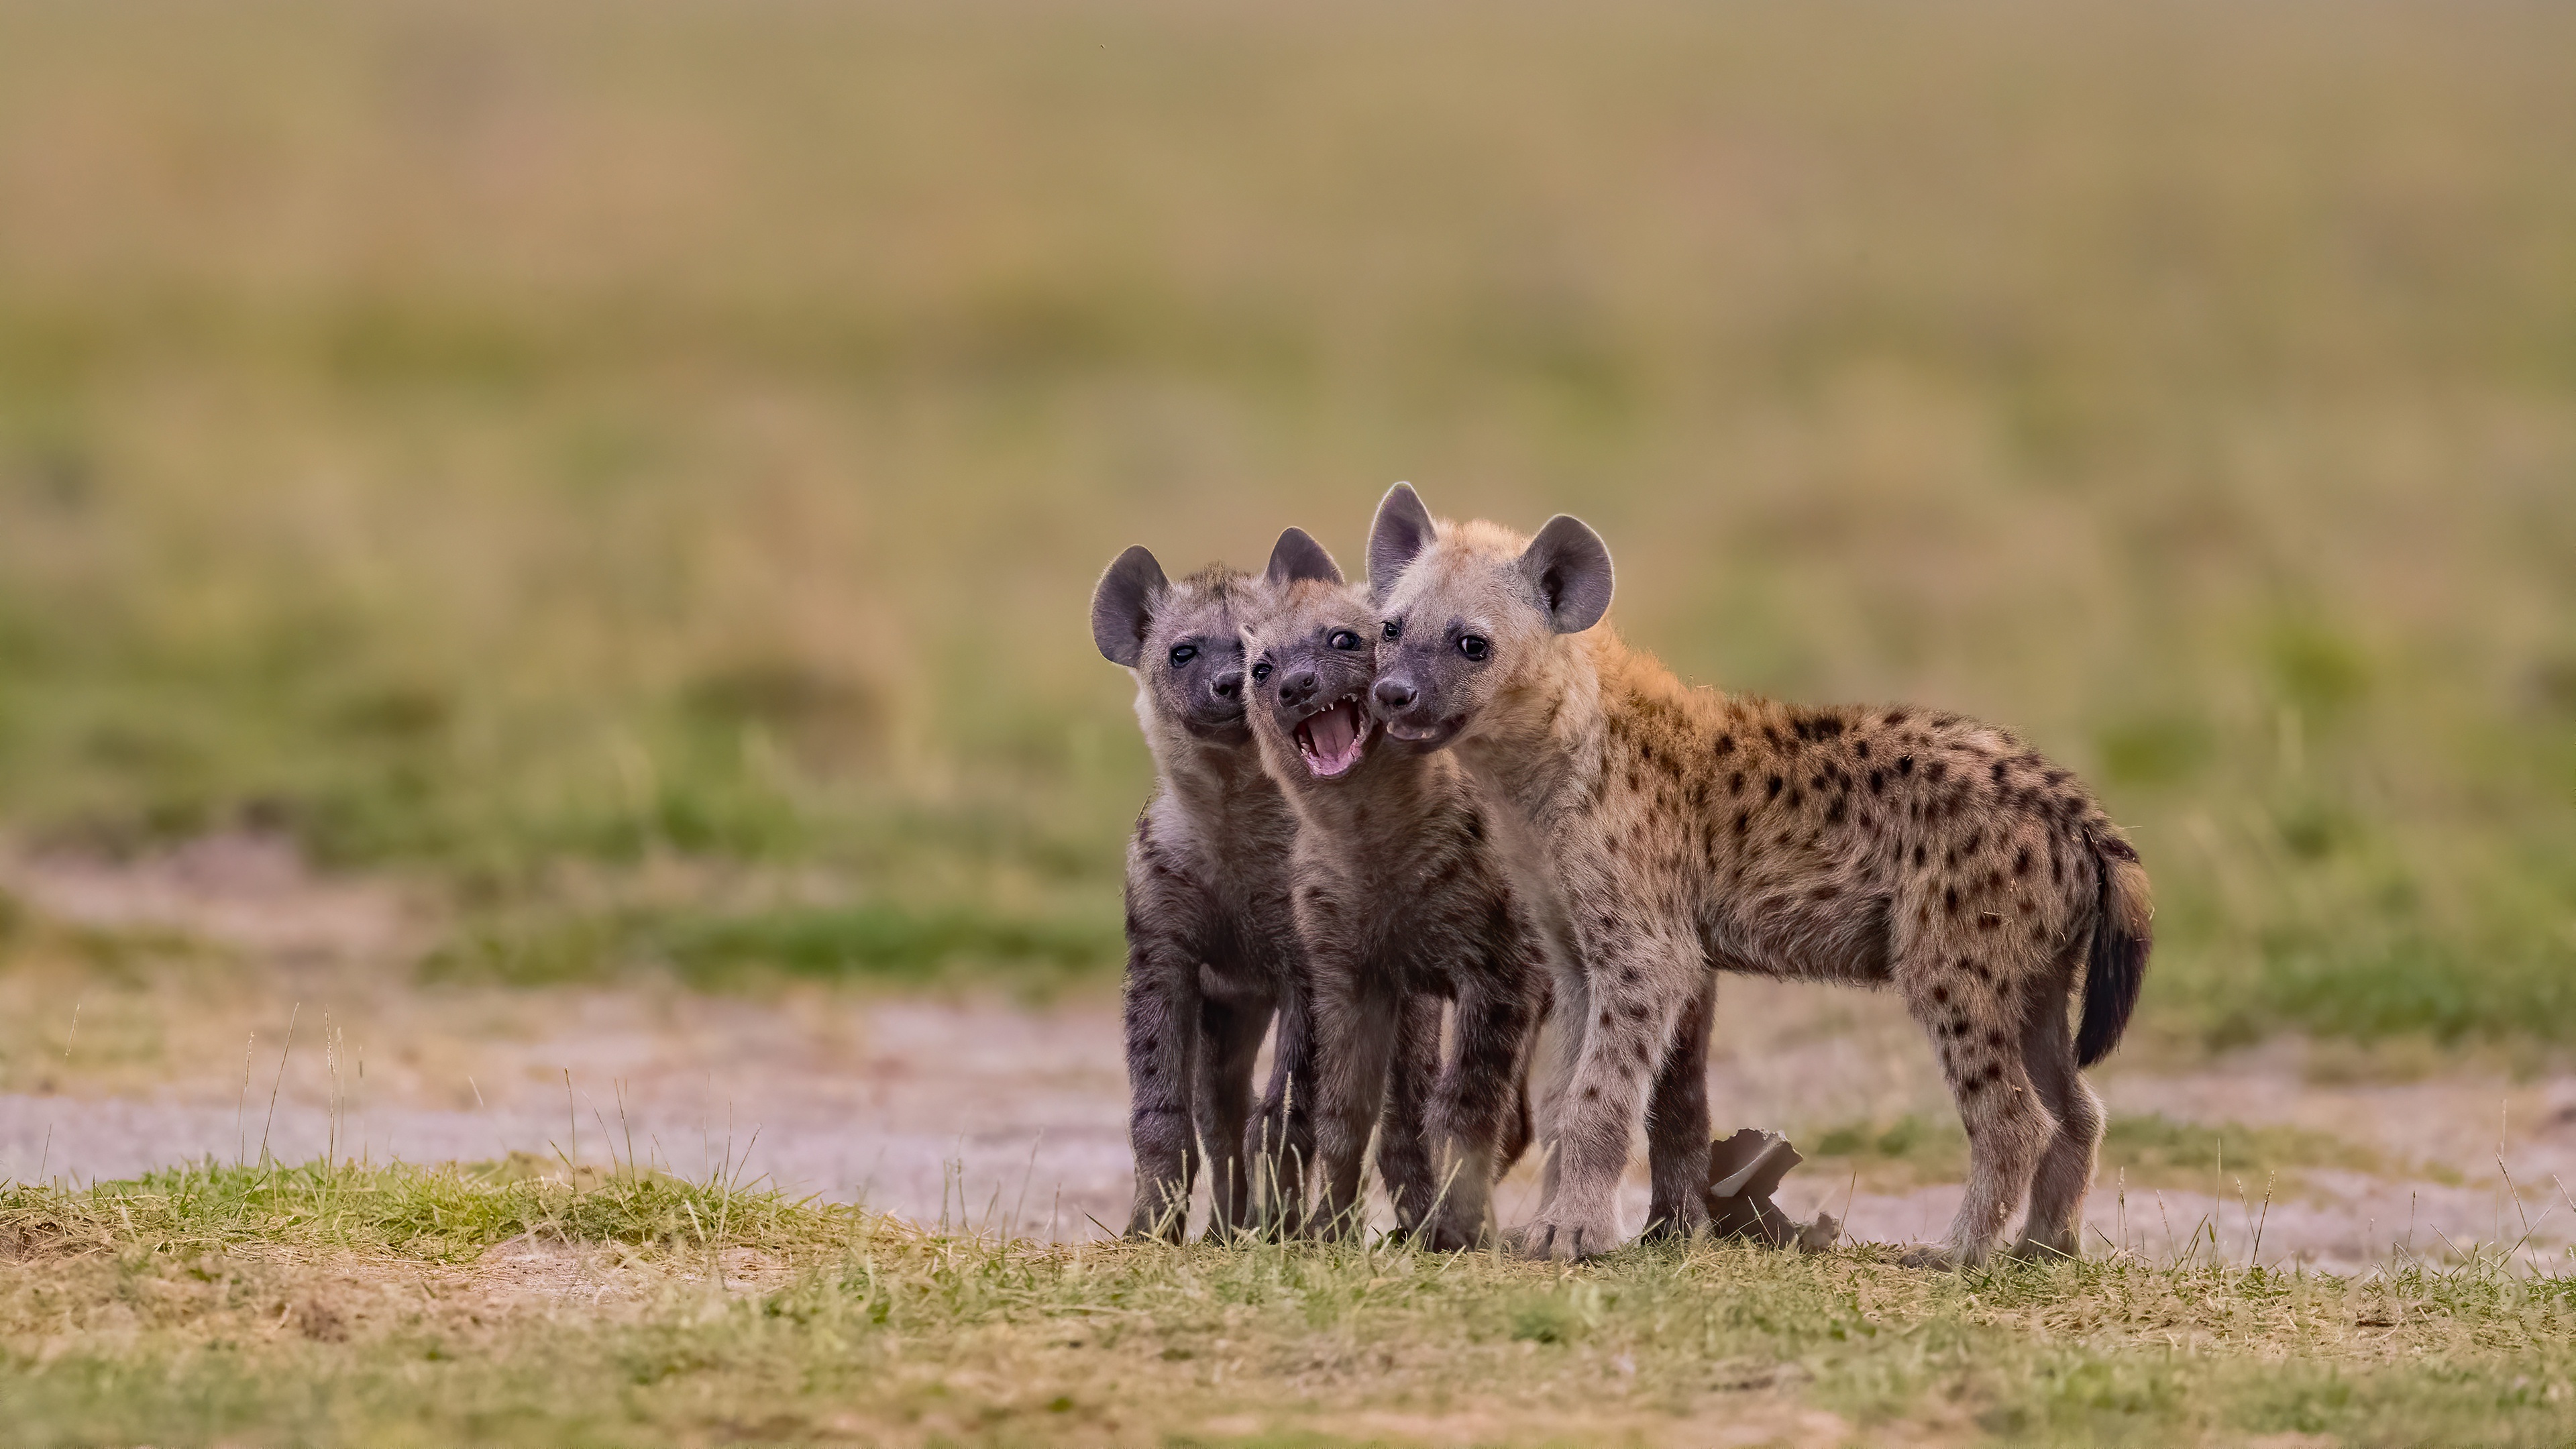 Group of young hyenas, Social animals, Wild and fascinating, Nature's wonders, 3840x2160 4K Desktop